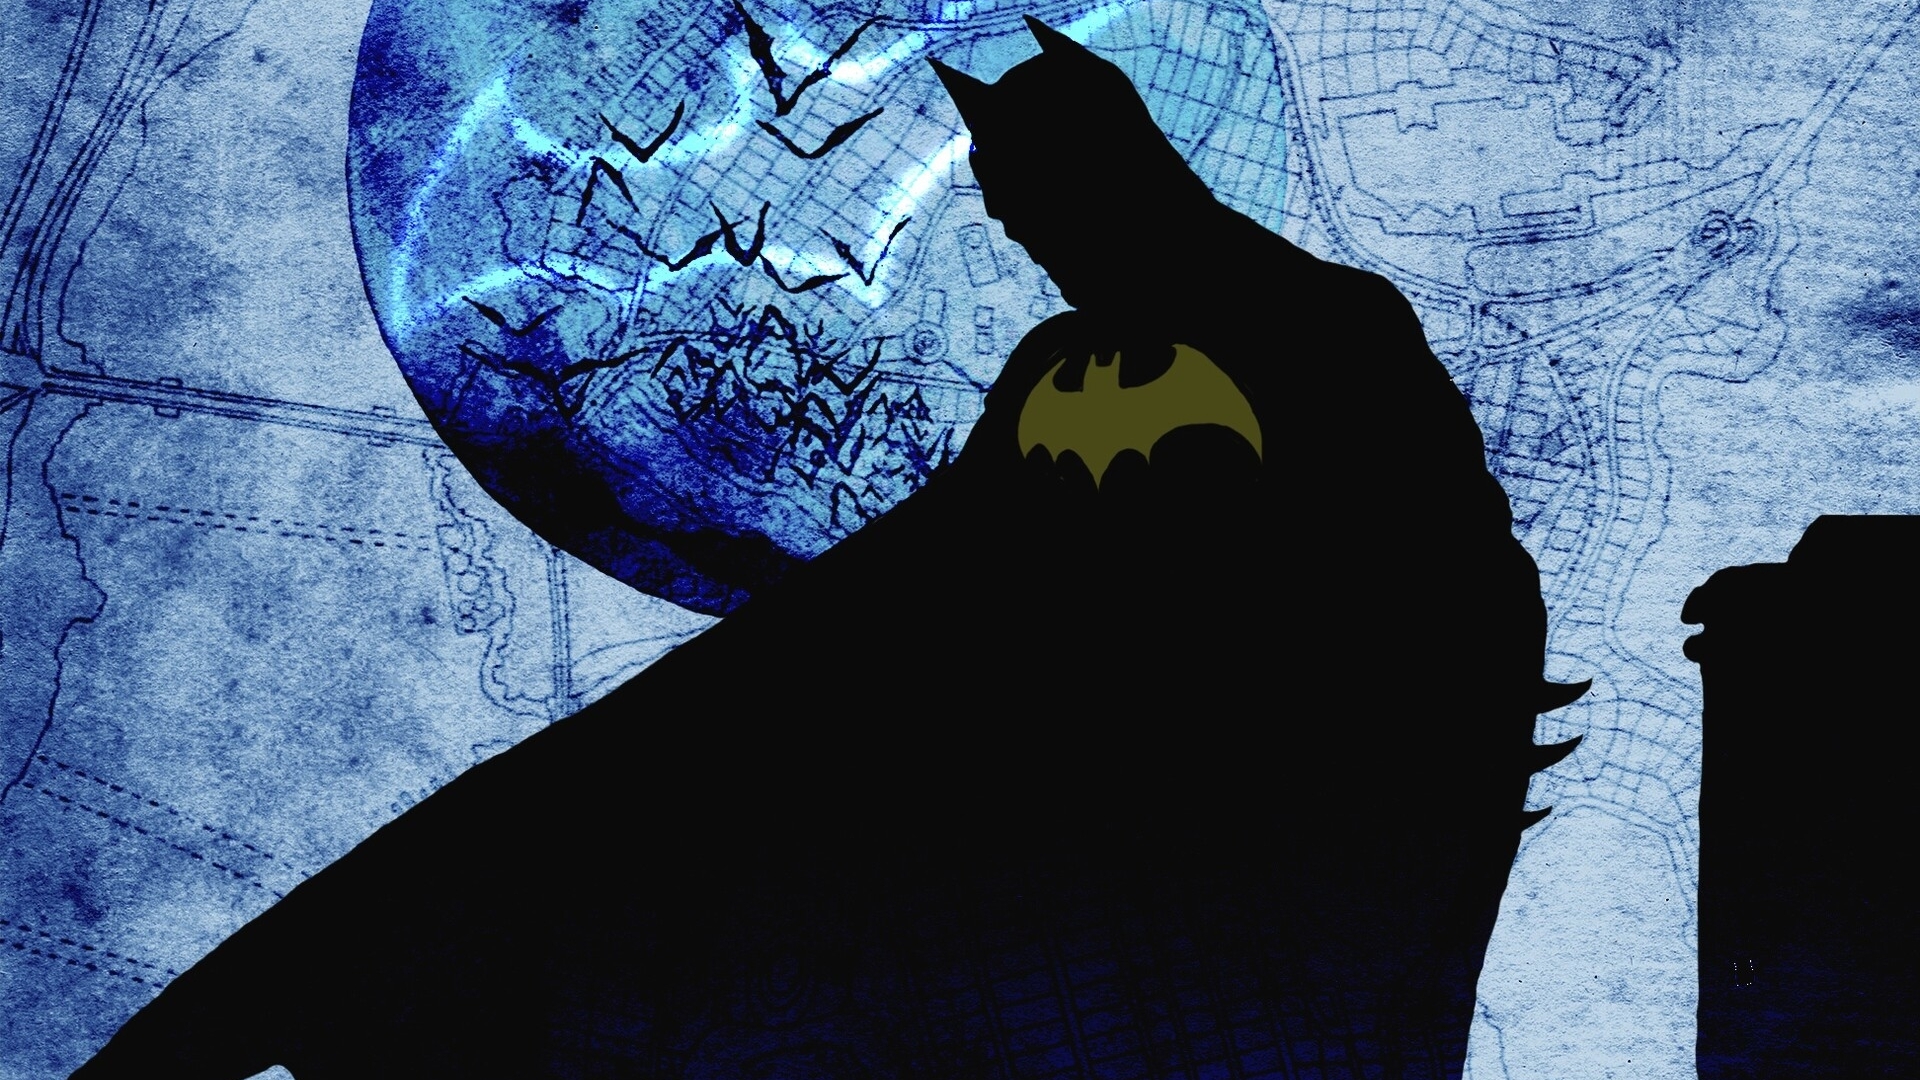 Batman Hd Wallpapers 1080p For Android Mobile